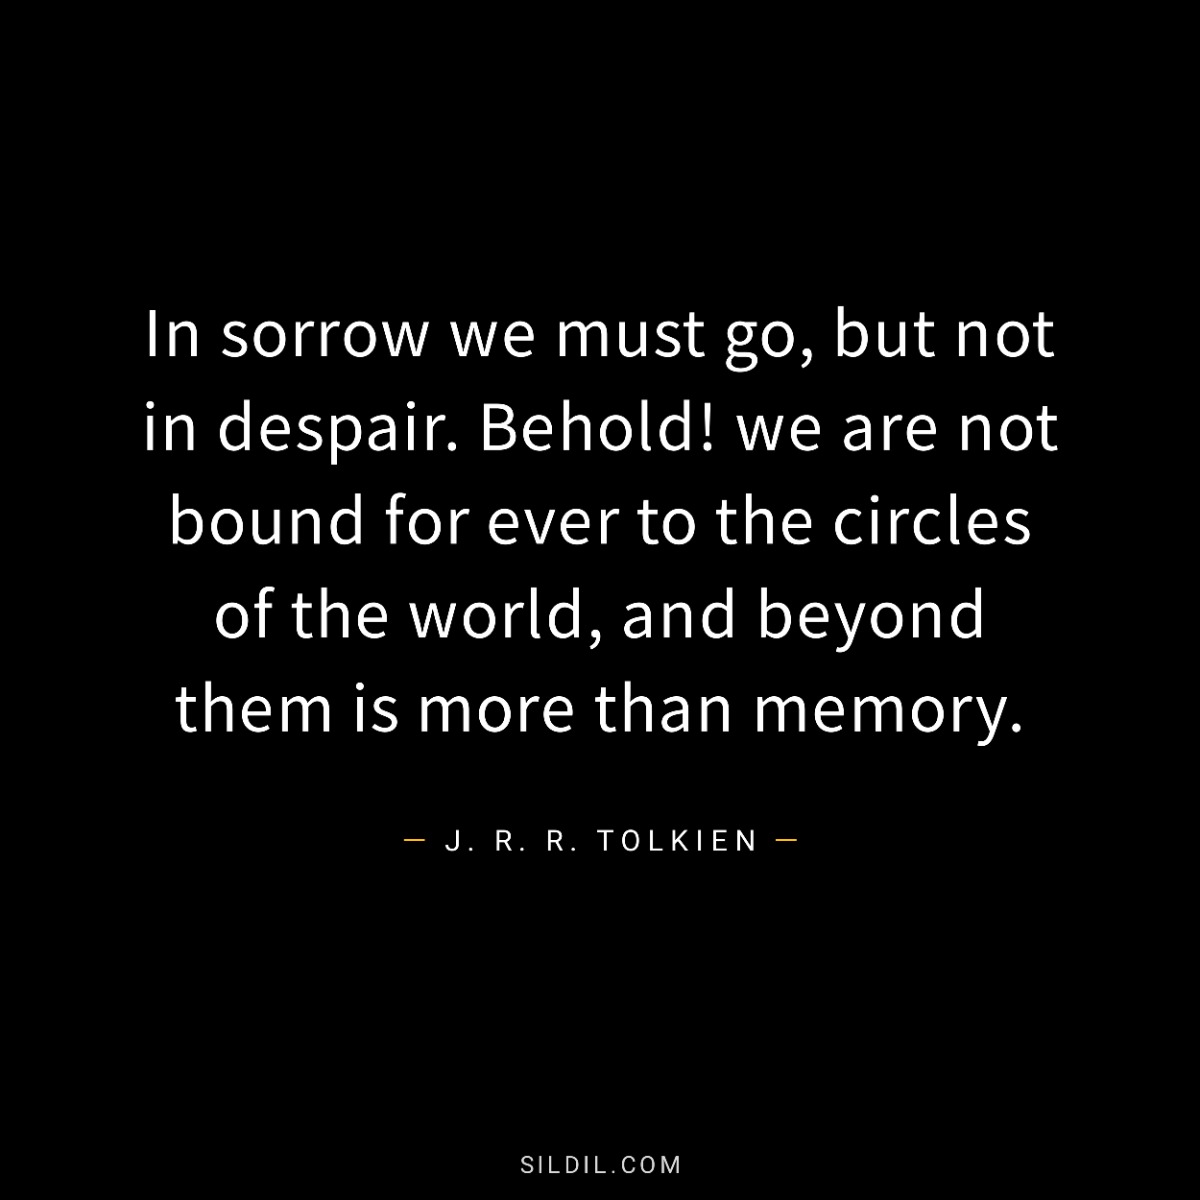 In sorrow we must go, but not in despair. Behold! we are not bound for ever to the circles of the world, and beyond them is more than memory.